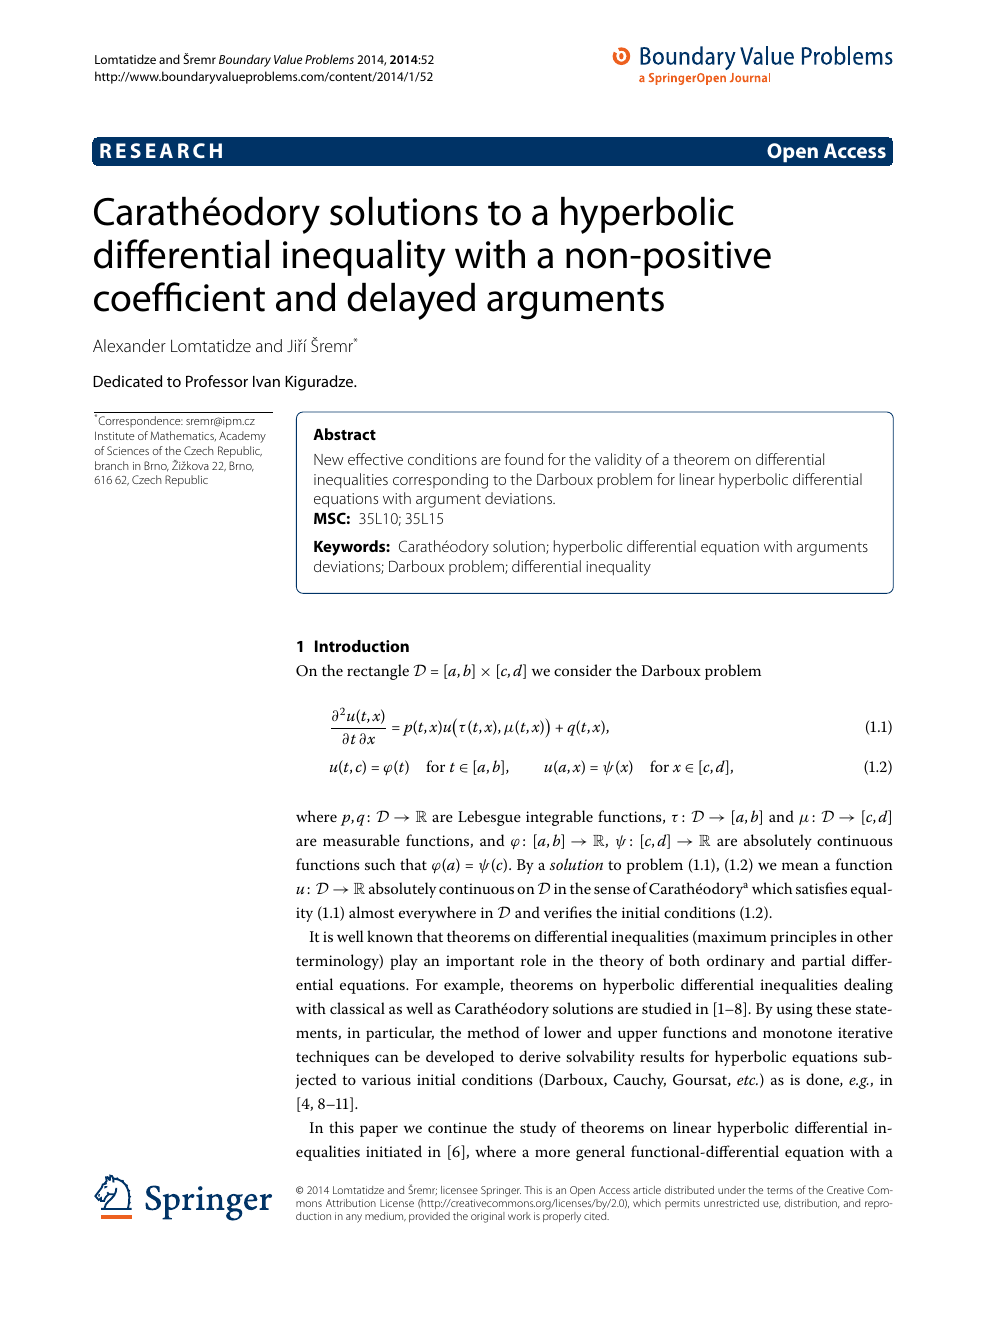 Caratheodory Solutions To A Hyperbolic Differential Inequality With A Non Positive Coefficient And Delayed Arguments Topic Of Research Paper In Mathematics Download Scholarly Article Pdf And Read For Free On Cyberleninka Open